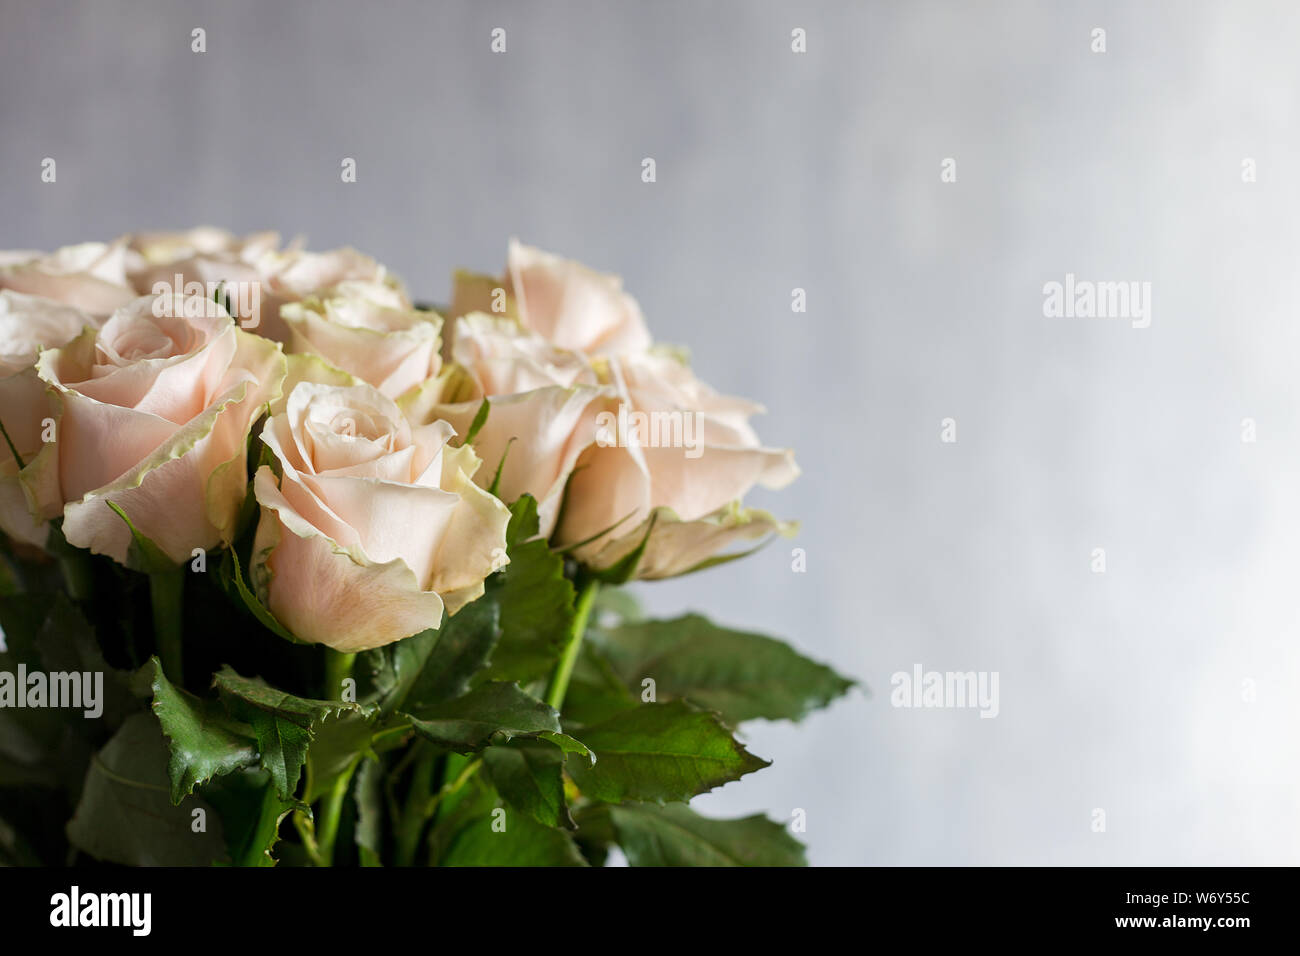 Greeting card with white roses on gray background. Concept of free space background Stock Photo